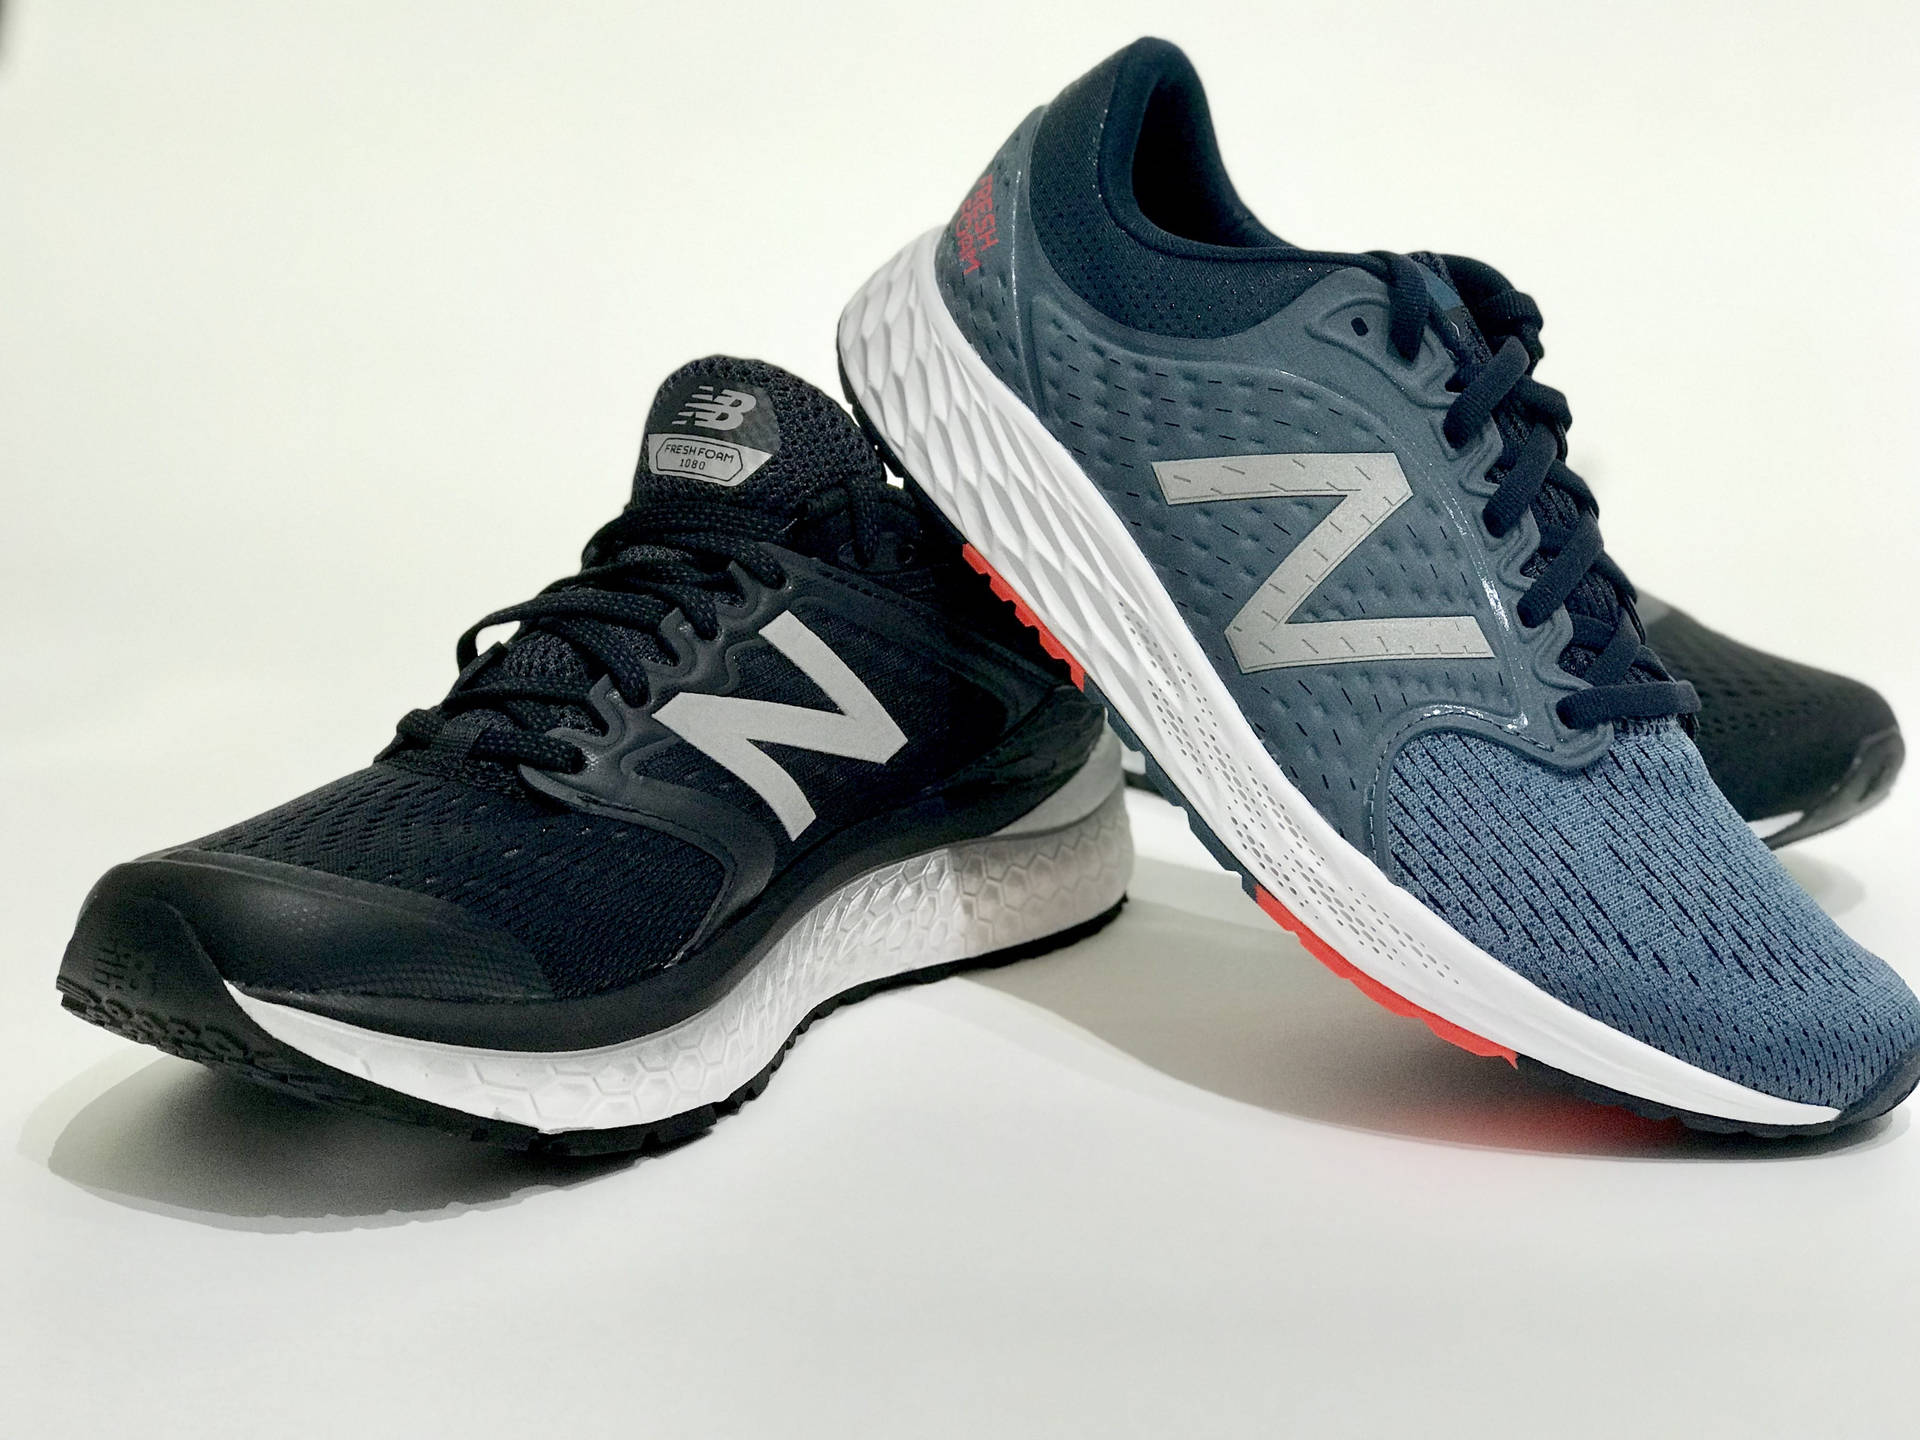 New Balance Different Coloured Pair Background